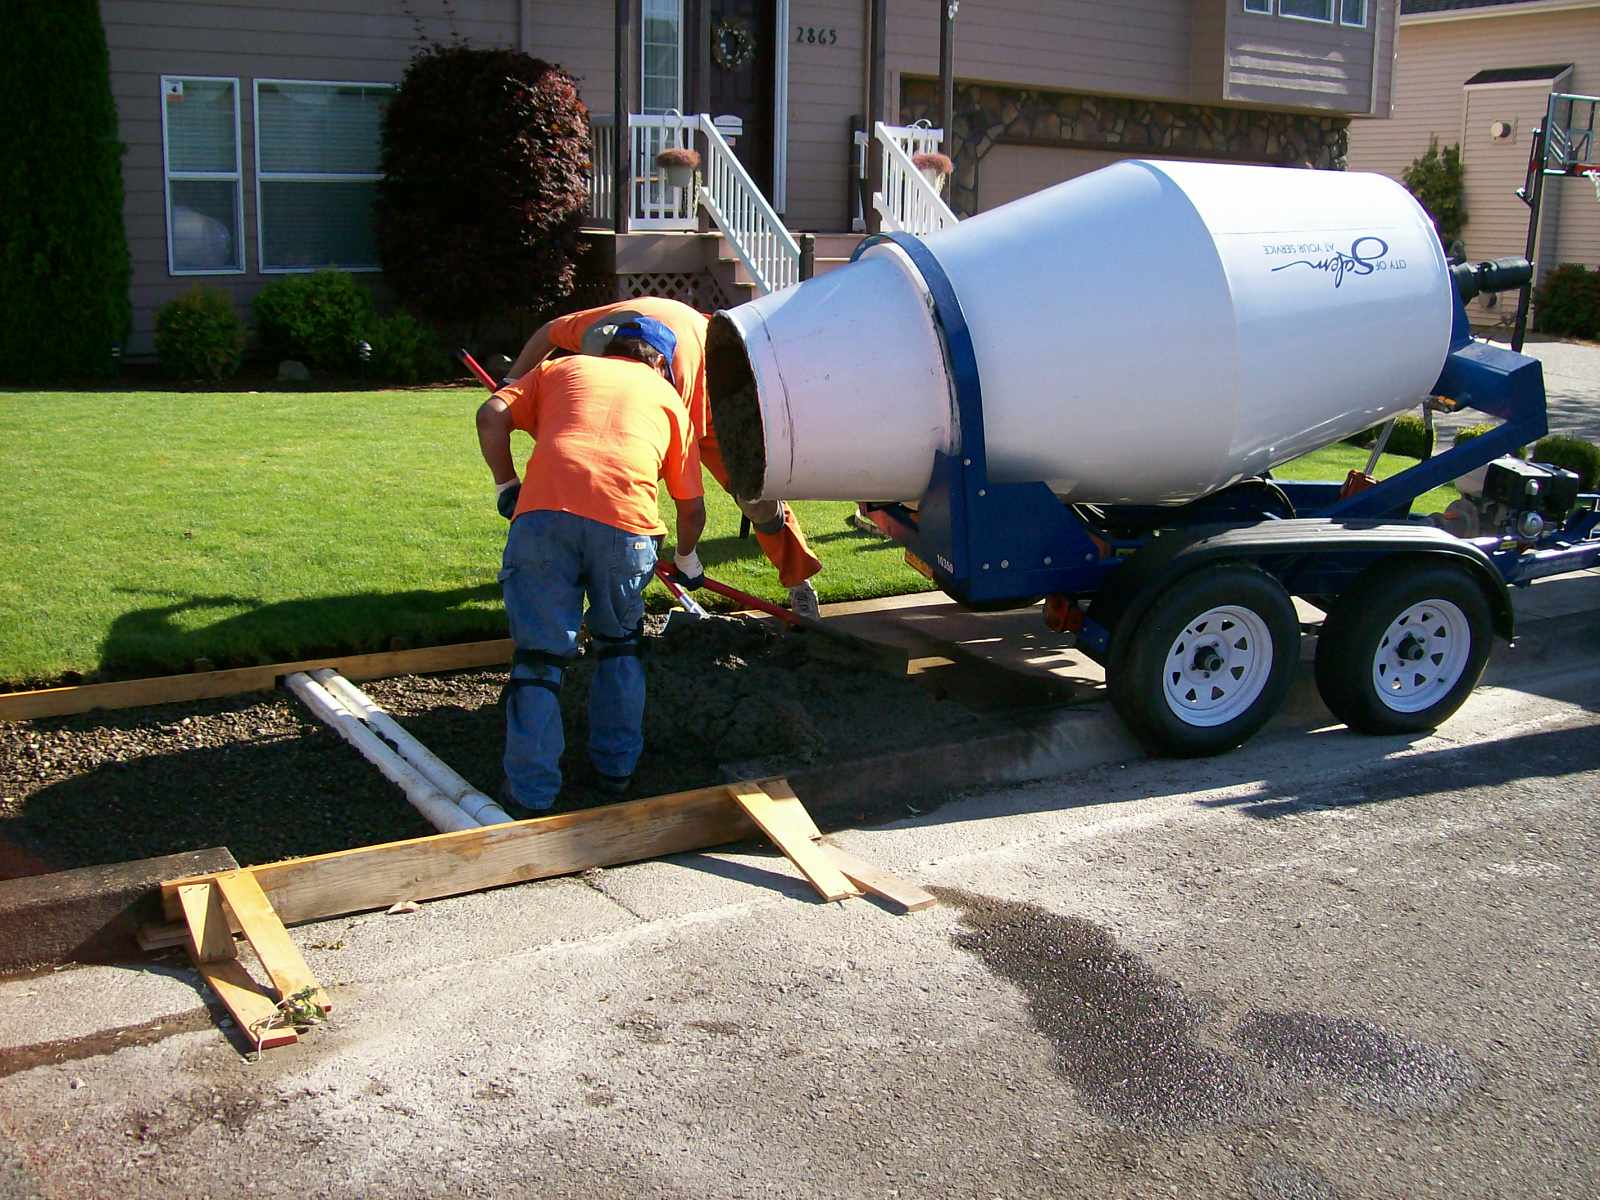 TrailerBased Concrete Offers New Product to Make Delivery